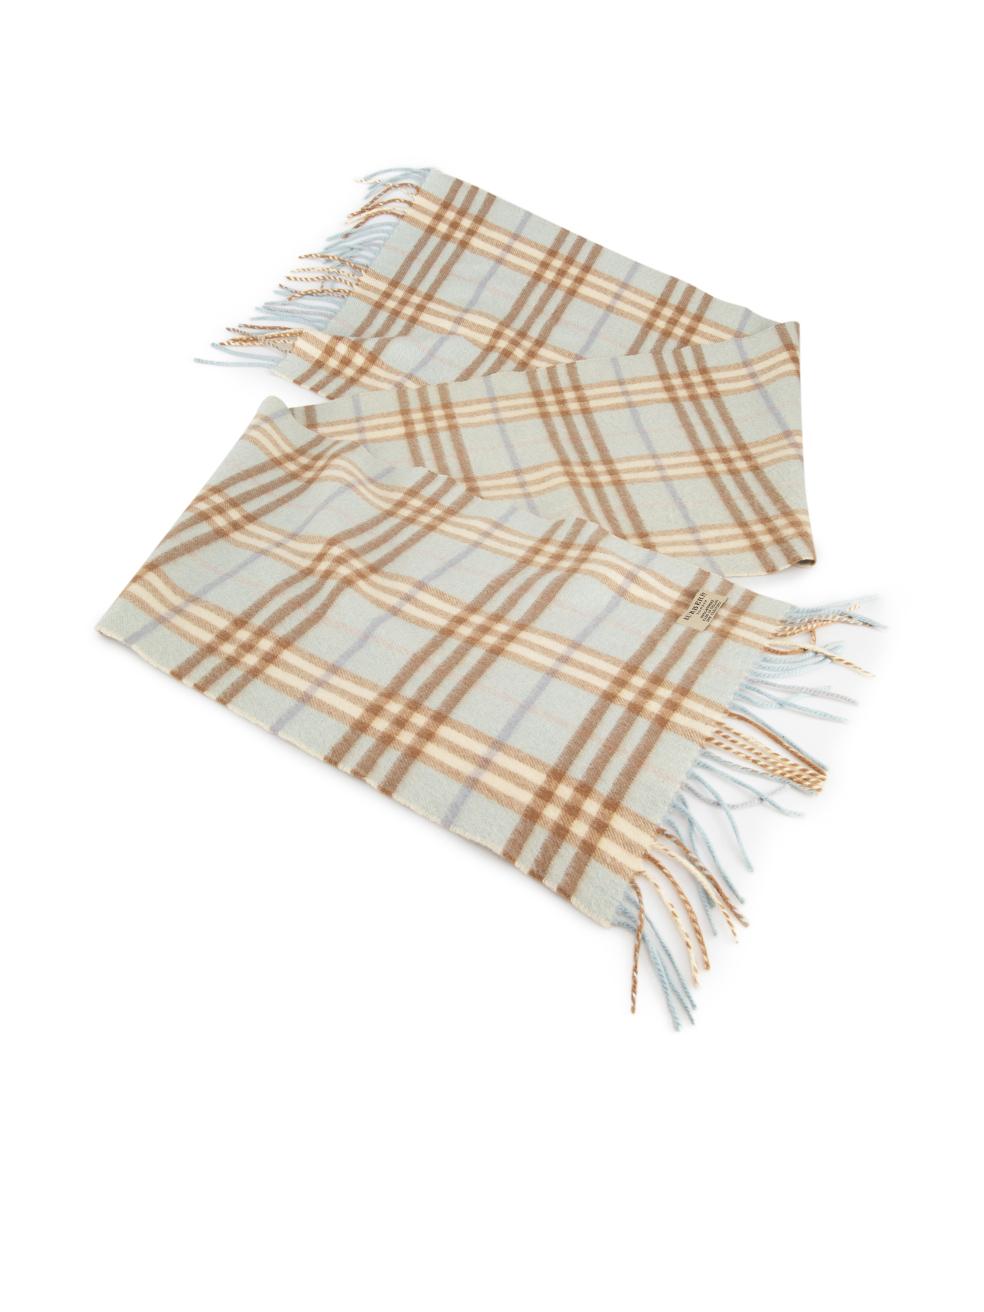 CONDITION is Very good. Minimal wear to scarf is evident. Minimal discoloured mark to edge of scarf on this used Burberry designer resale item.
 
Details
Blue
Cashmere
Scarf
Nova check pattern
Fringed hem
 
Made in England

Composition
100%